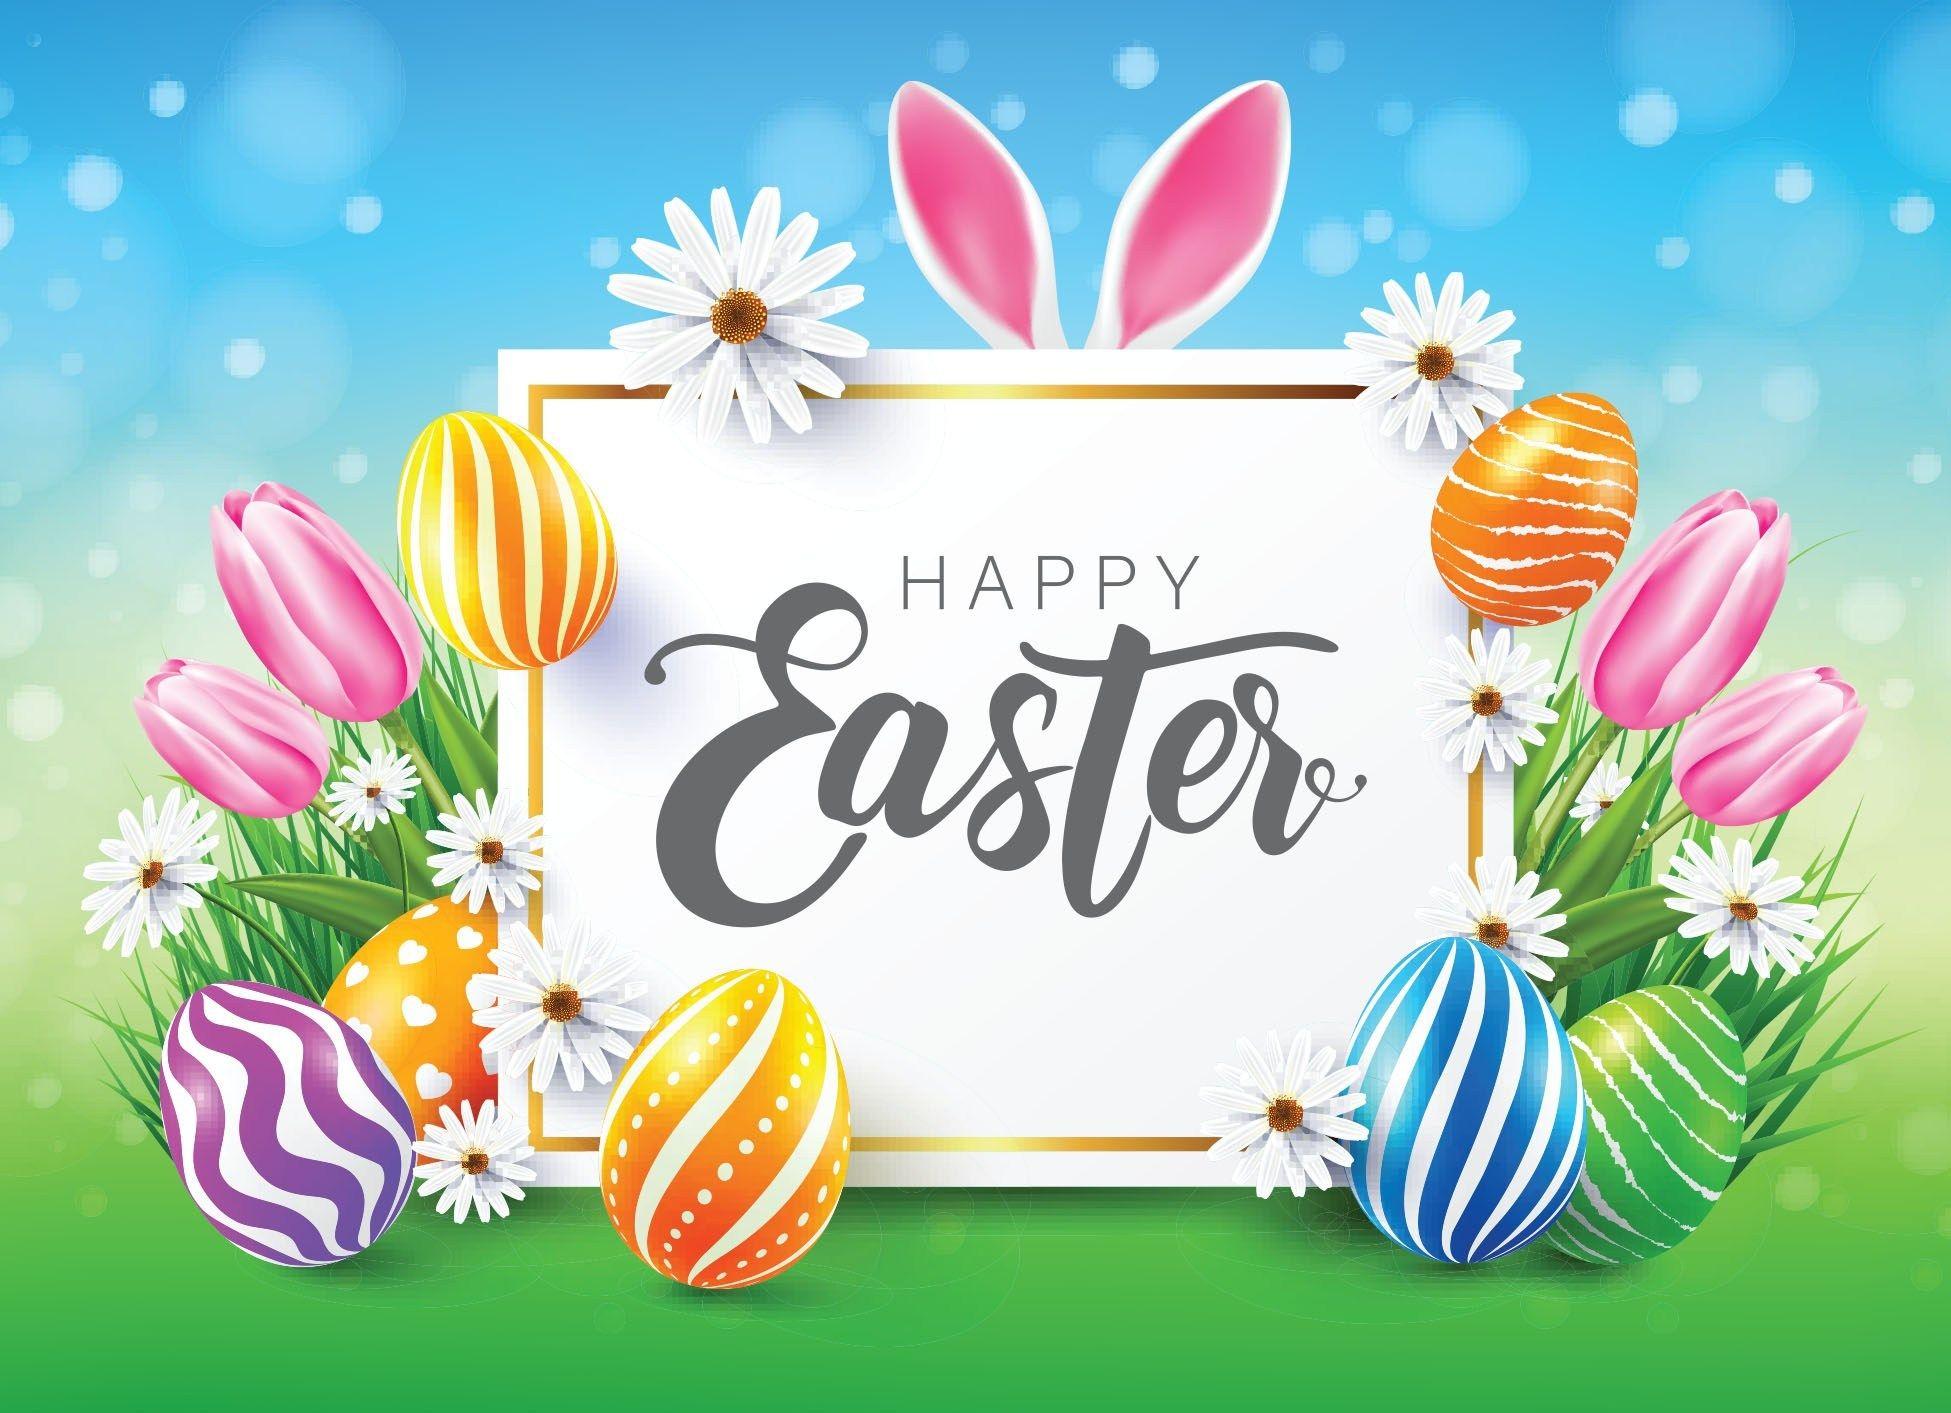 Happy Easter 2020 HD Wallpapers HD Background Images Photos